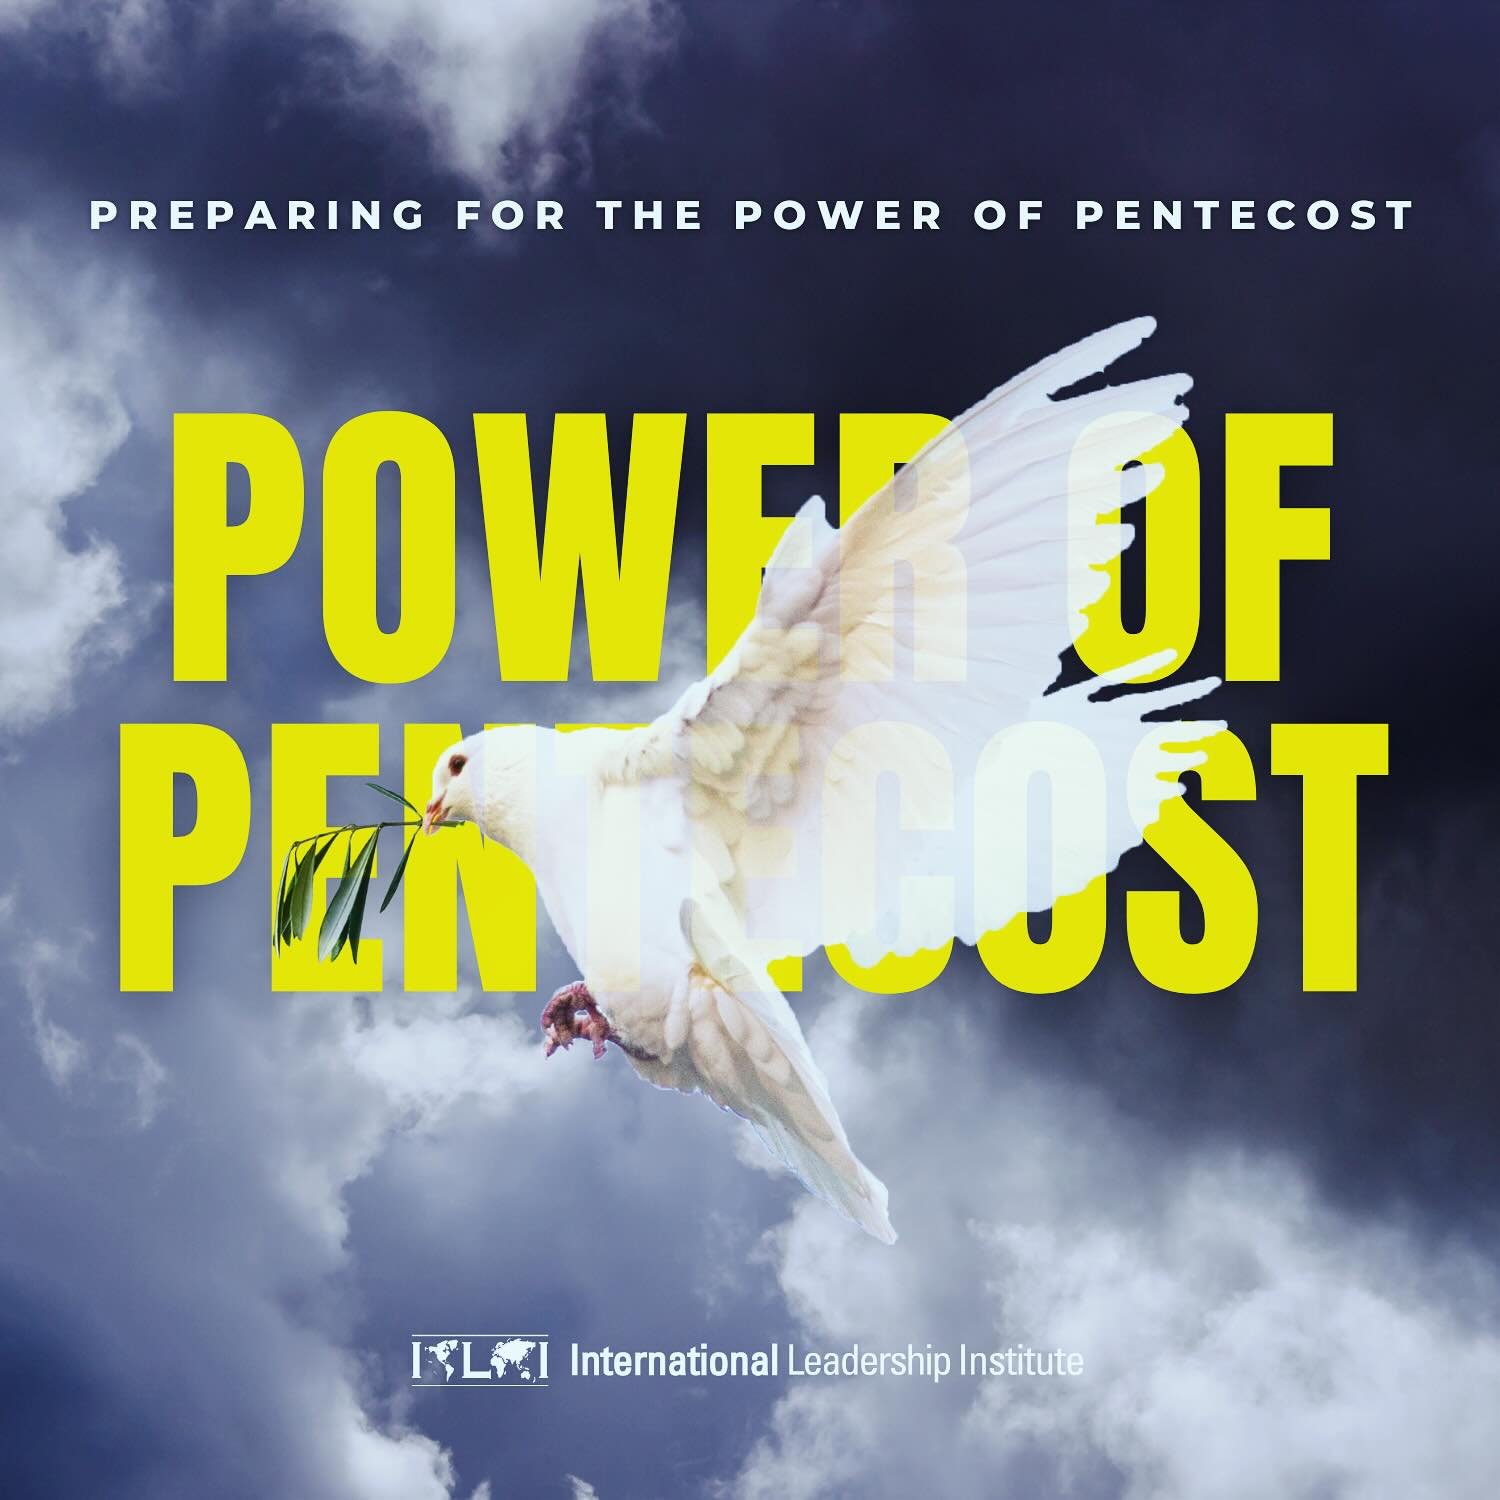 Pentecost is an event which continues to impact Believers and the Church around the world to this day. With a zealous passion and clear vision, leaders long for meaningful change. Every leader desires to see God powerfully send His Spirit. Learn the 